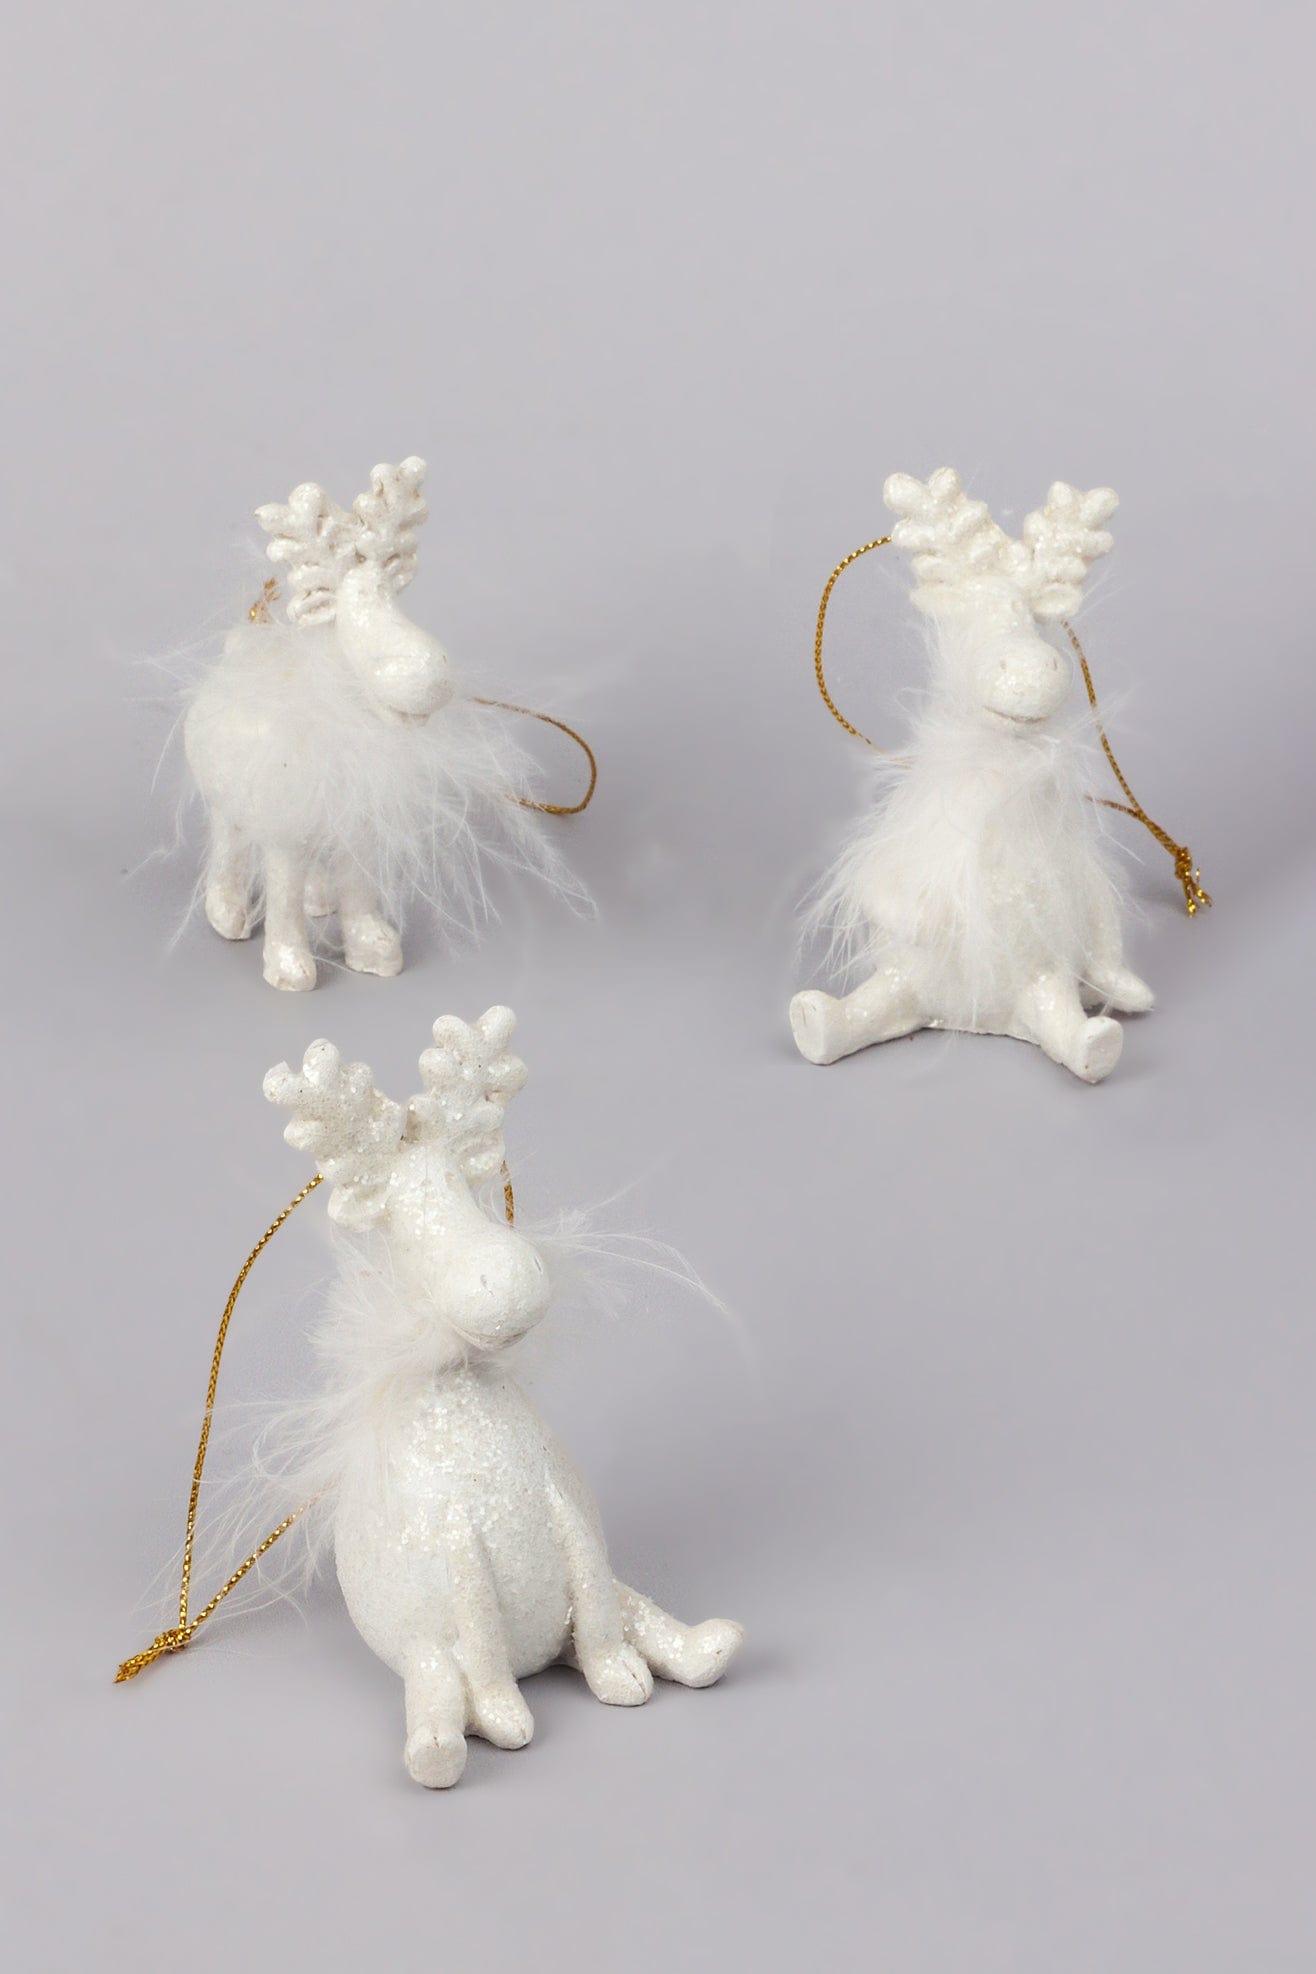 G Decor Christmas Decorations White / Set of All 3 Glittery and Fluffy White Cartoon Reindeer Ornaments